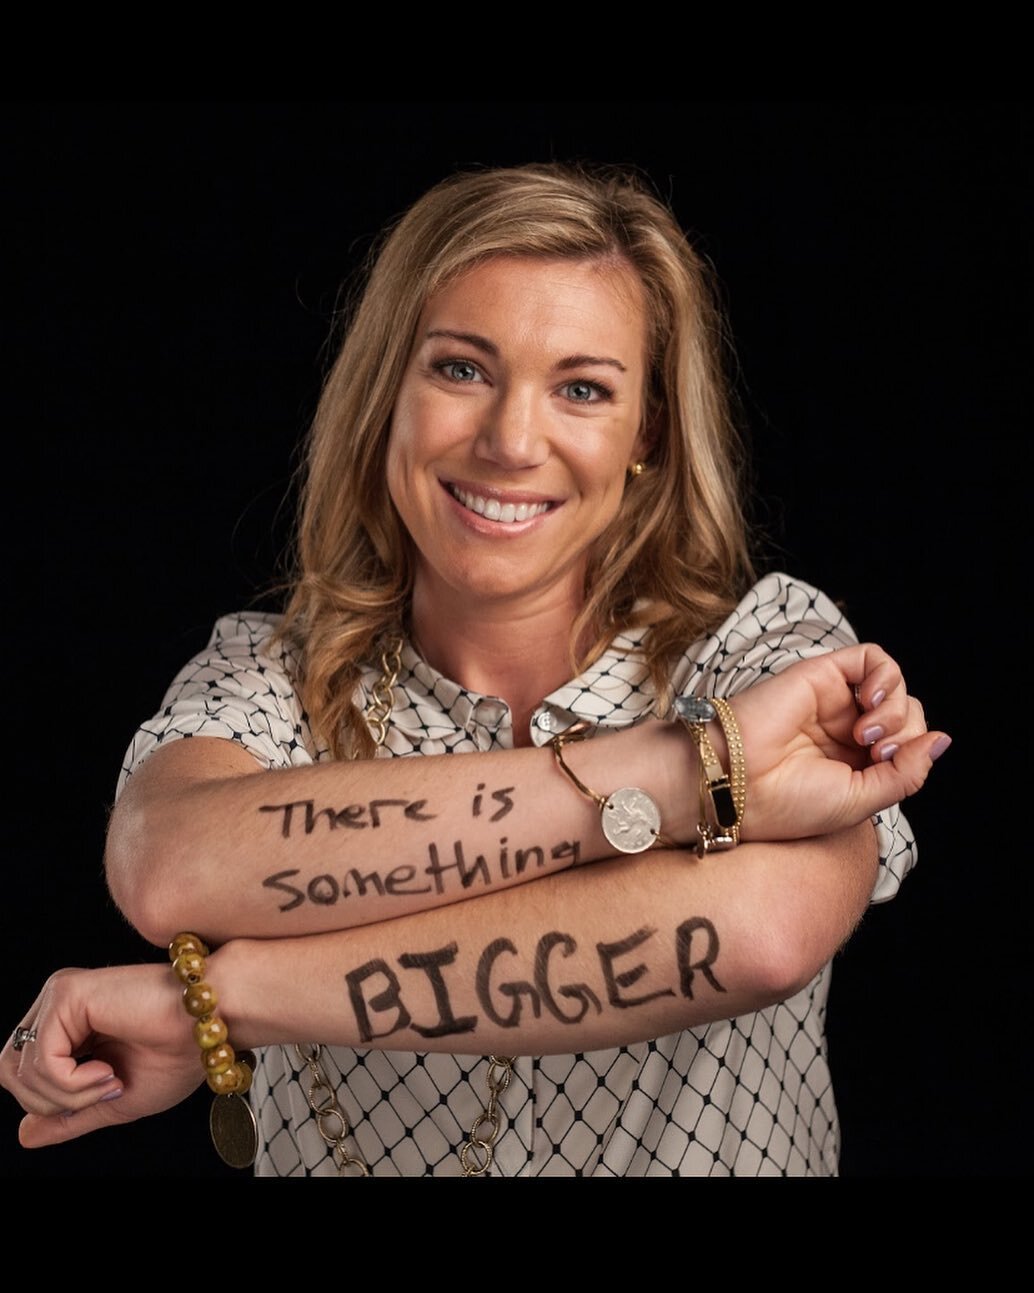 This picture was taken on Feb 9, 2015, at a sales meeting. It was part of @rxfogarty &ldquo;Dear World Project&rdquo; where we wrote a meaningful phrase on our arms. I didn&rsquo;t know exactly what my &ldquo;bigger&rdquo; was at the time, but knew I